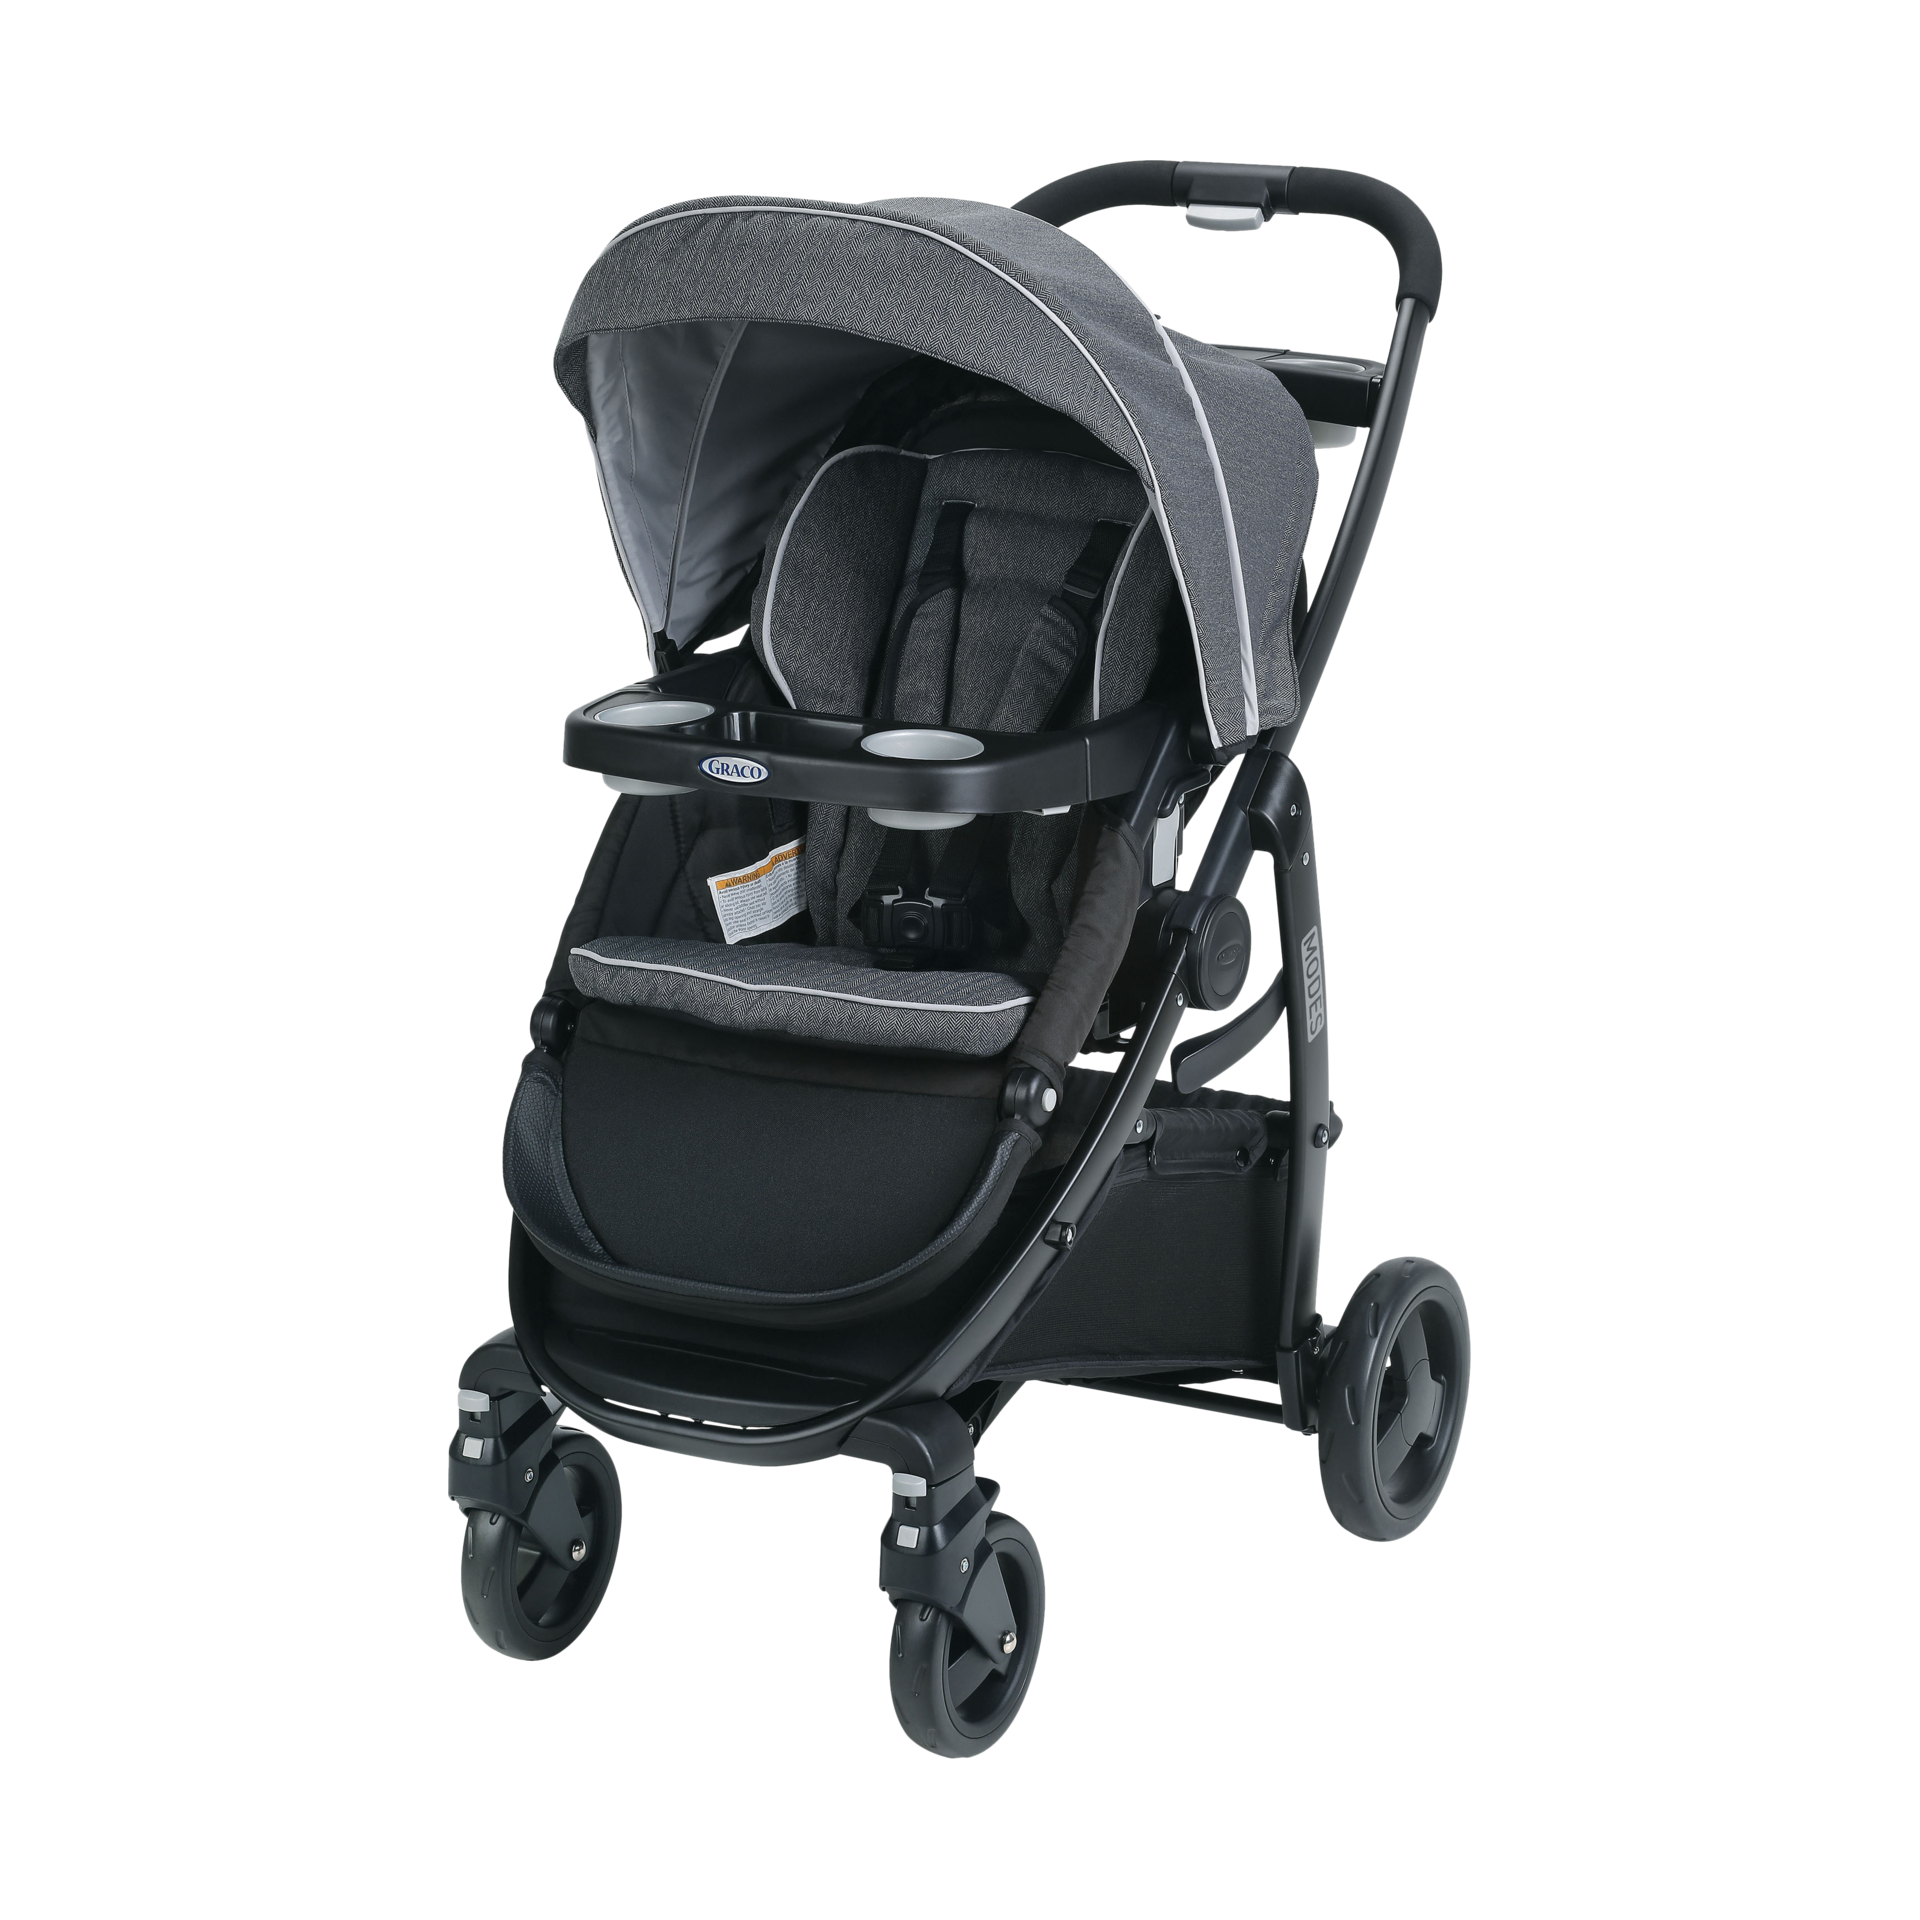 good quality strollers